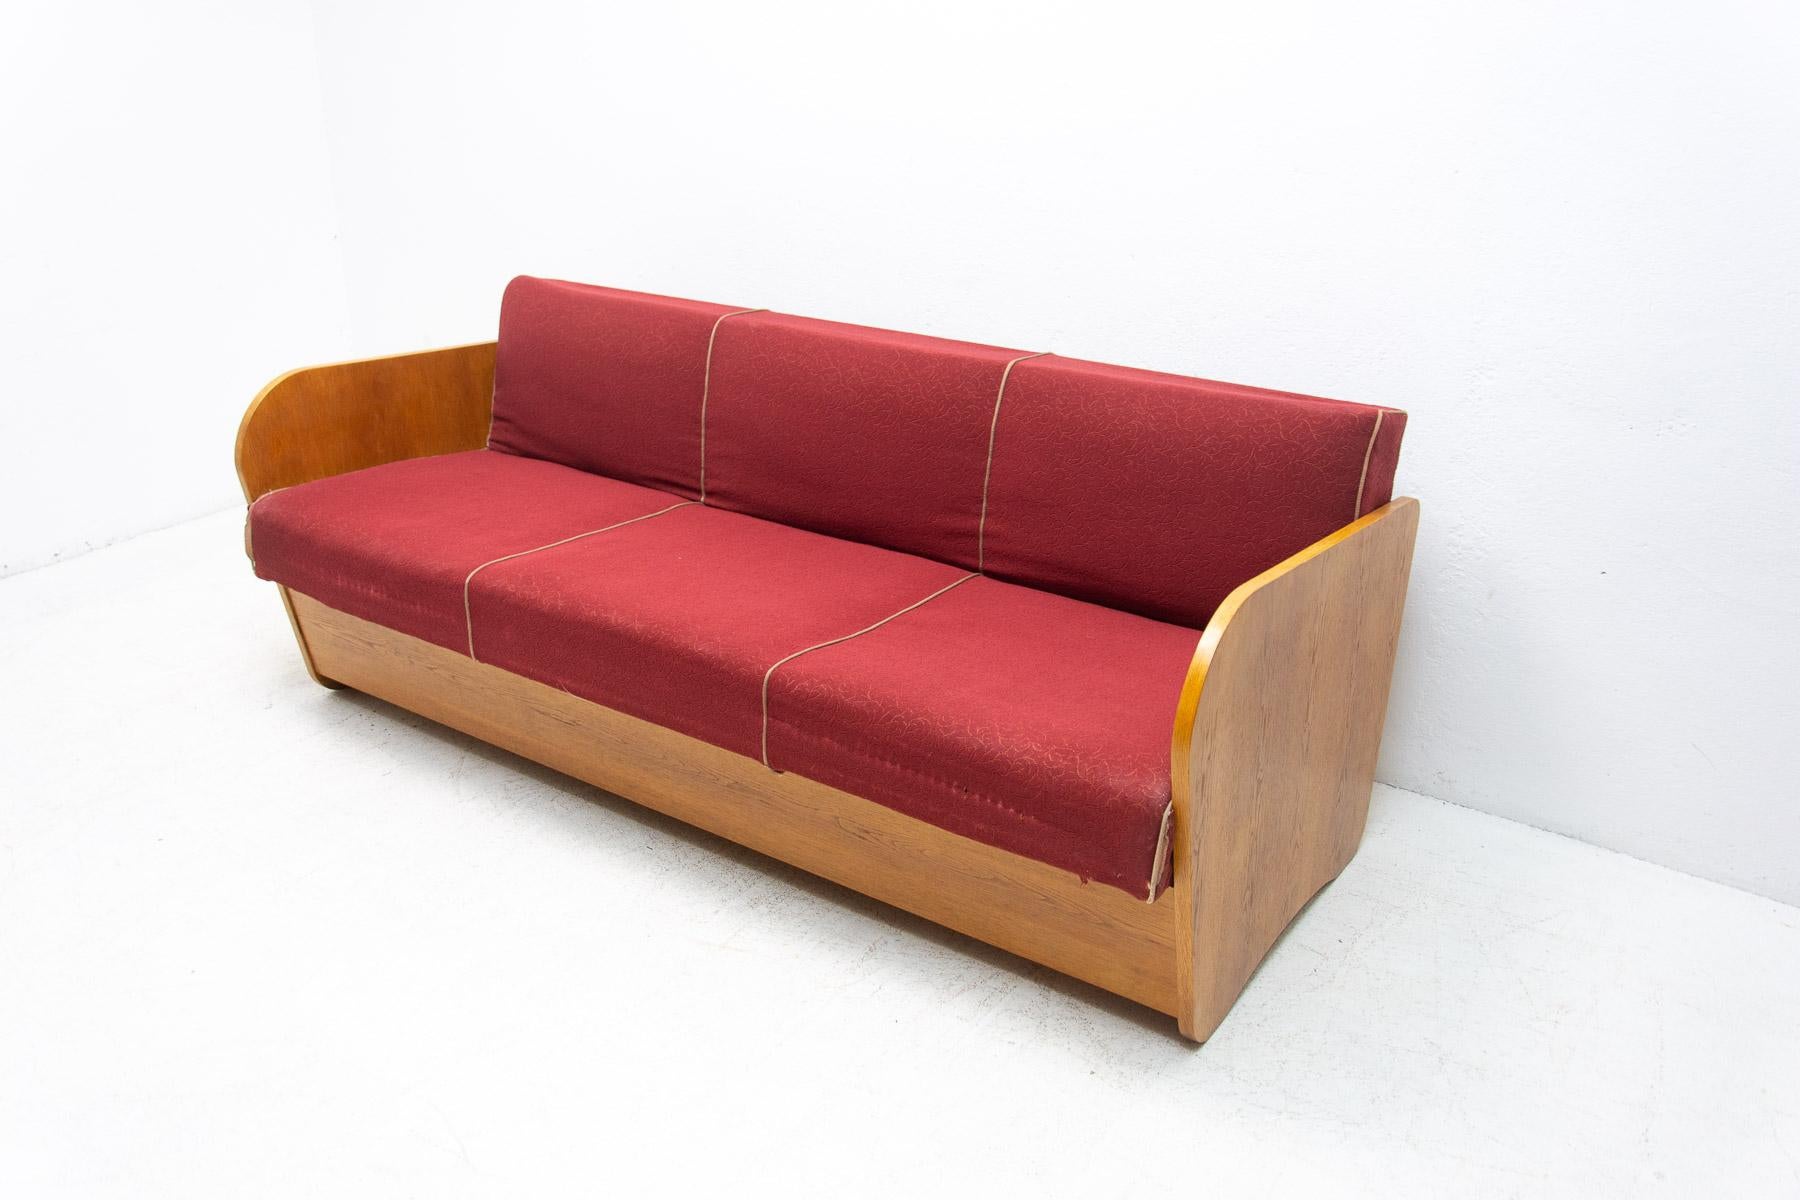 This folding sofabed with storage space was designed by the famous Czechoslovak architect Jindrich Halabala in the 1950´s. Very attractive and simple design. The construction is of beech wood. Overall in good Vintage condition, showing signs of age